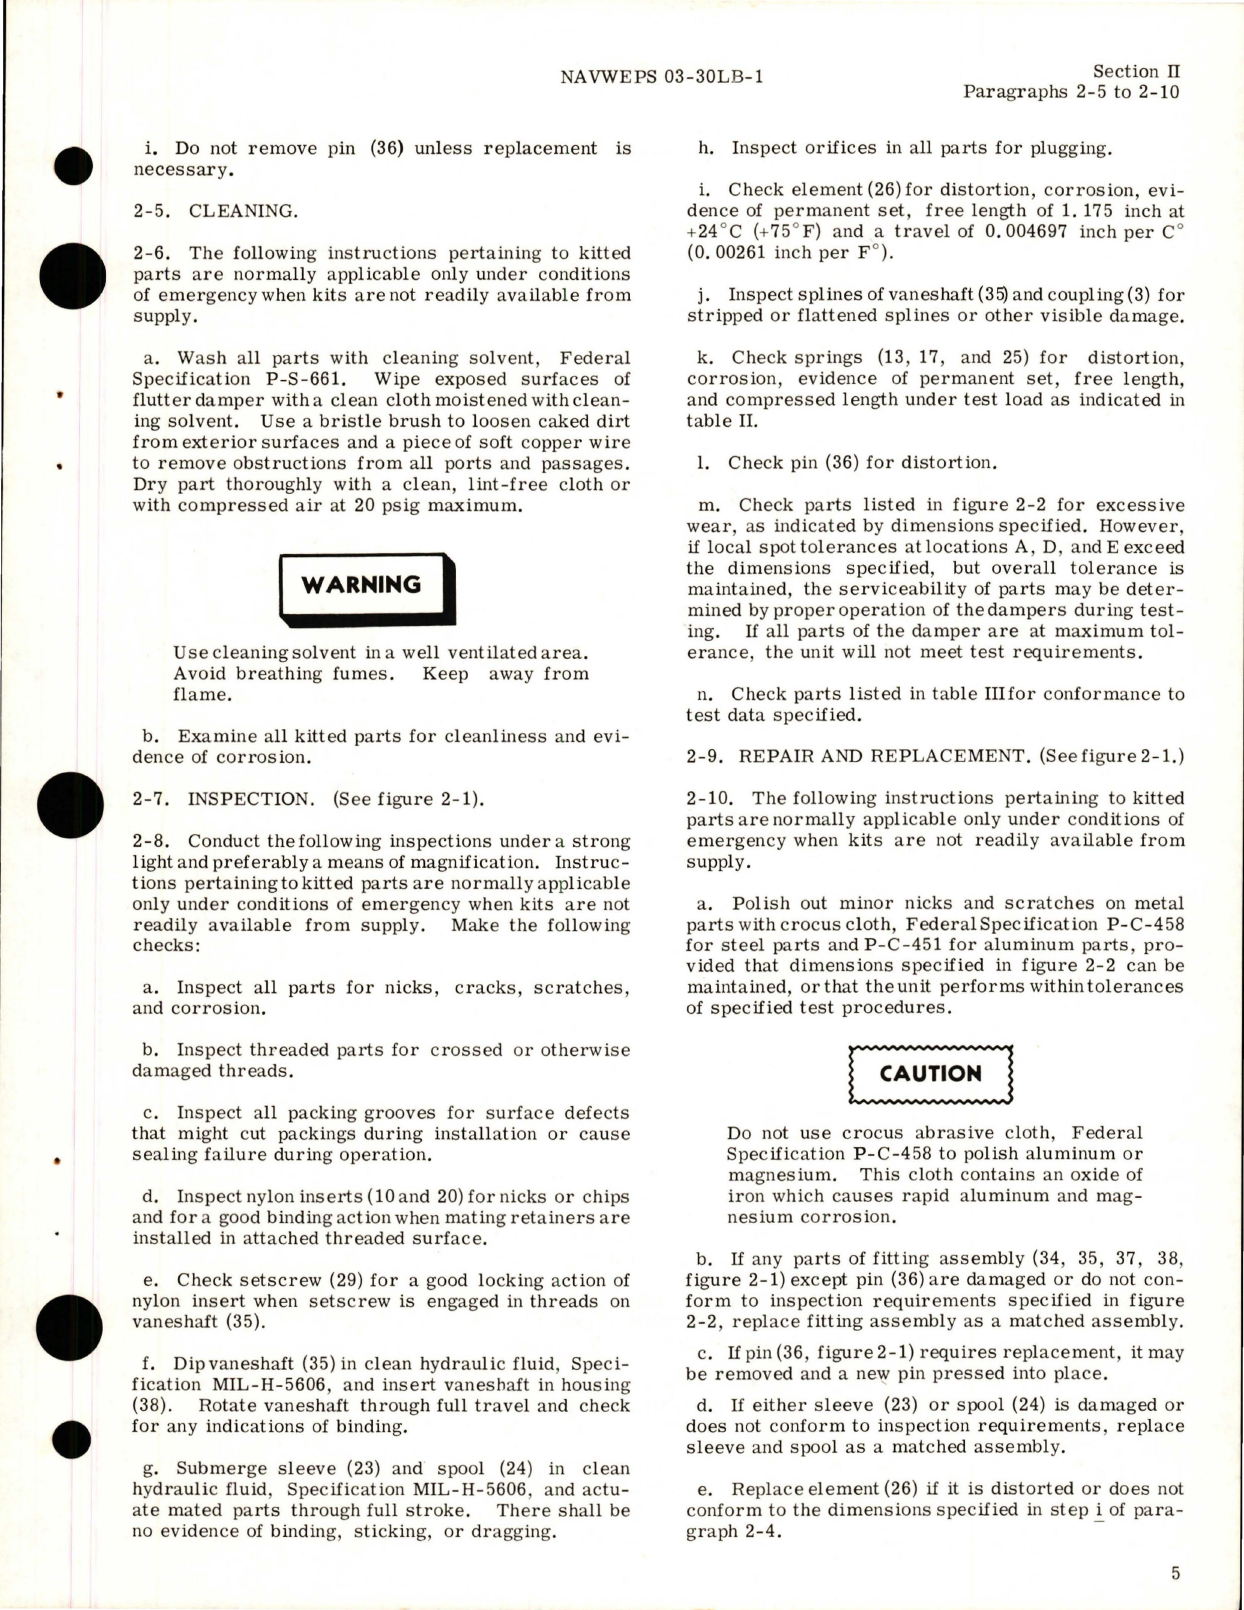 Sample page 9 from AirCorps Library document: Overhaul Instructions for Flutter Dampers - Parts 100721A, 100721A-1, 100721A-3, 100723A & 100723A-1